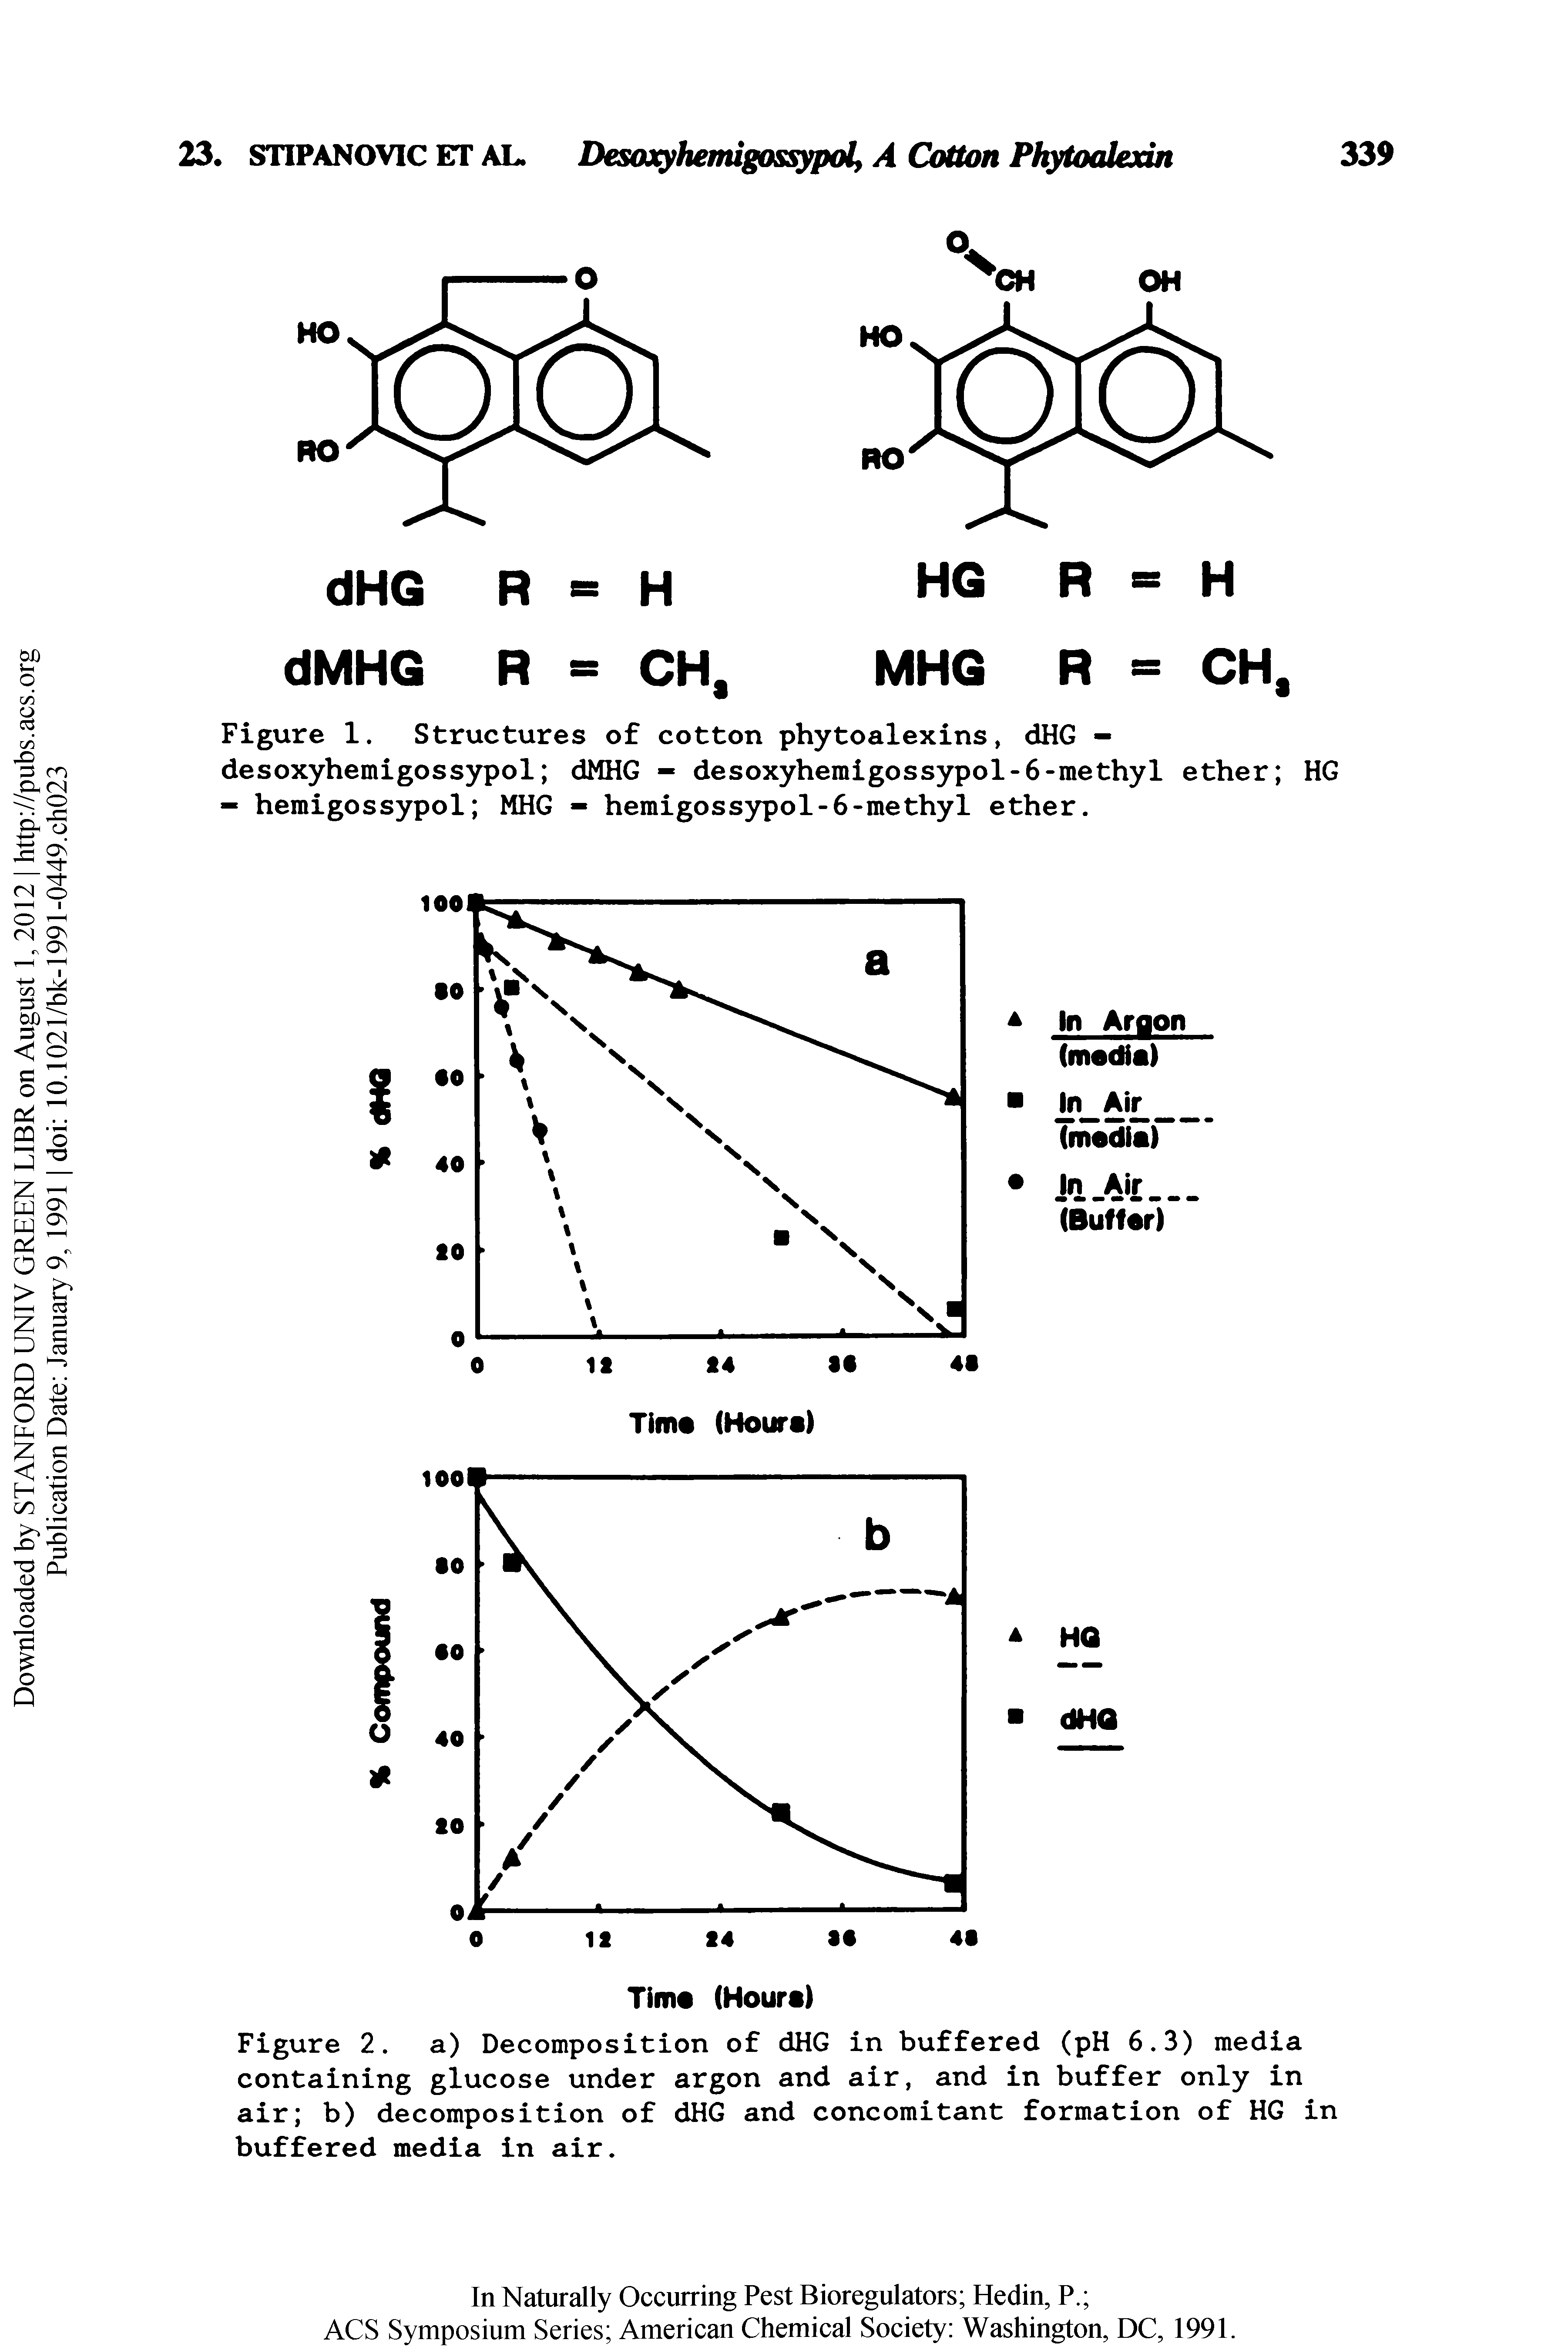 Figure 1. Structures of cotton phytoalexins, dHG -desoxyhemigossypol dMHG — desoxyhemigossypol-6-methyl ether HG - hemigossypol MHG - hemigoss)rpol-6-methyl ether.